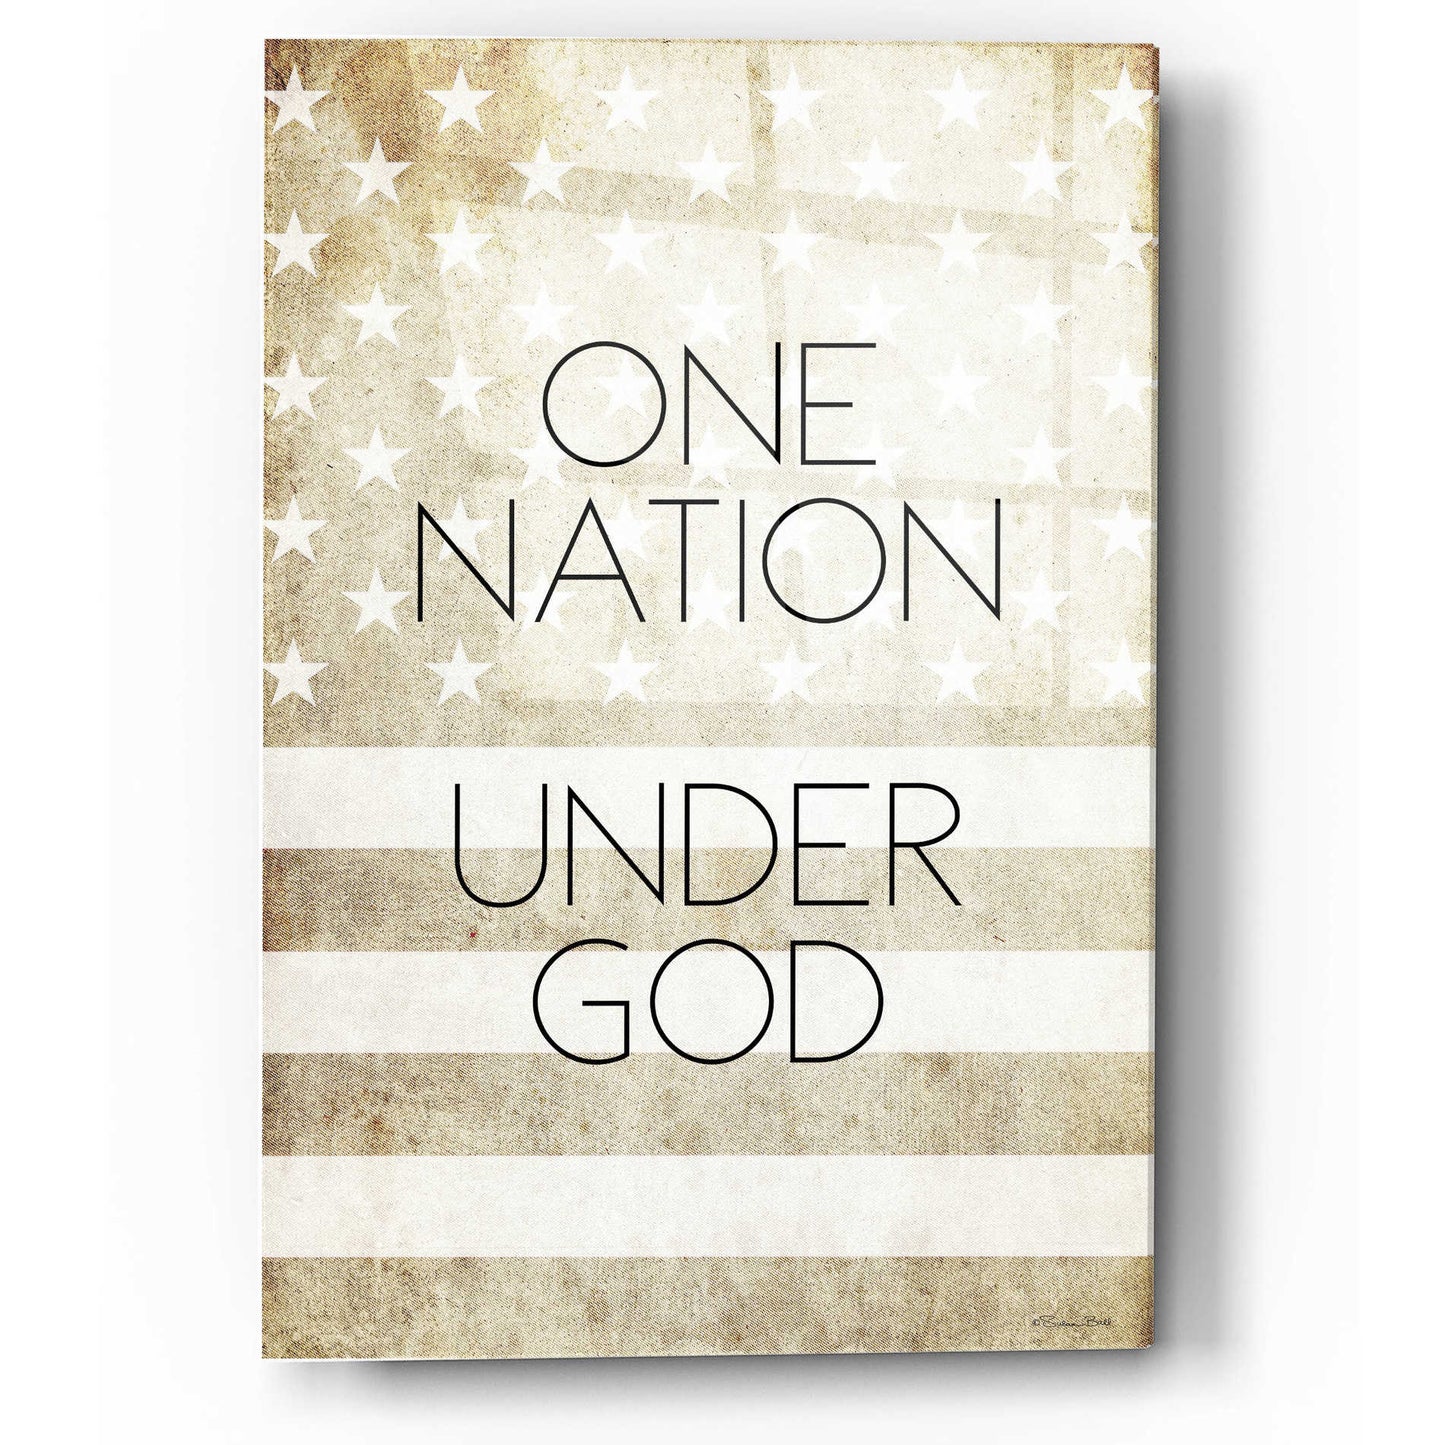 Epic Art 'One Nation Under God' by Susan Ball, Acrylic Glass Wall Art